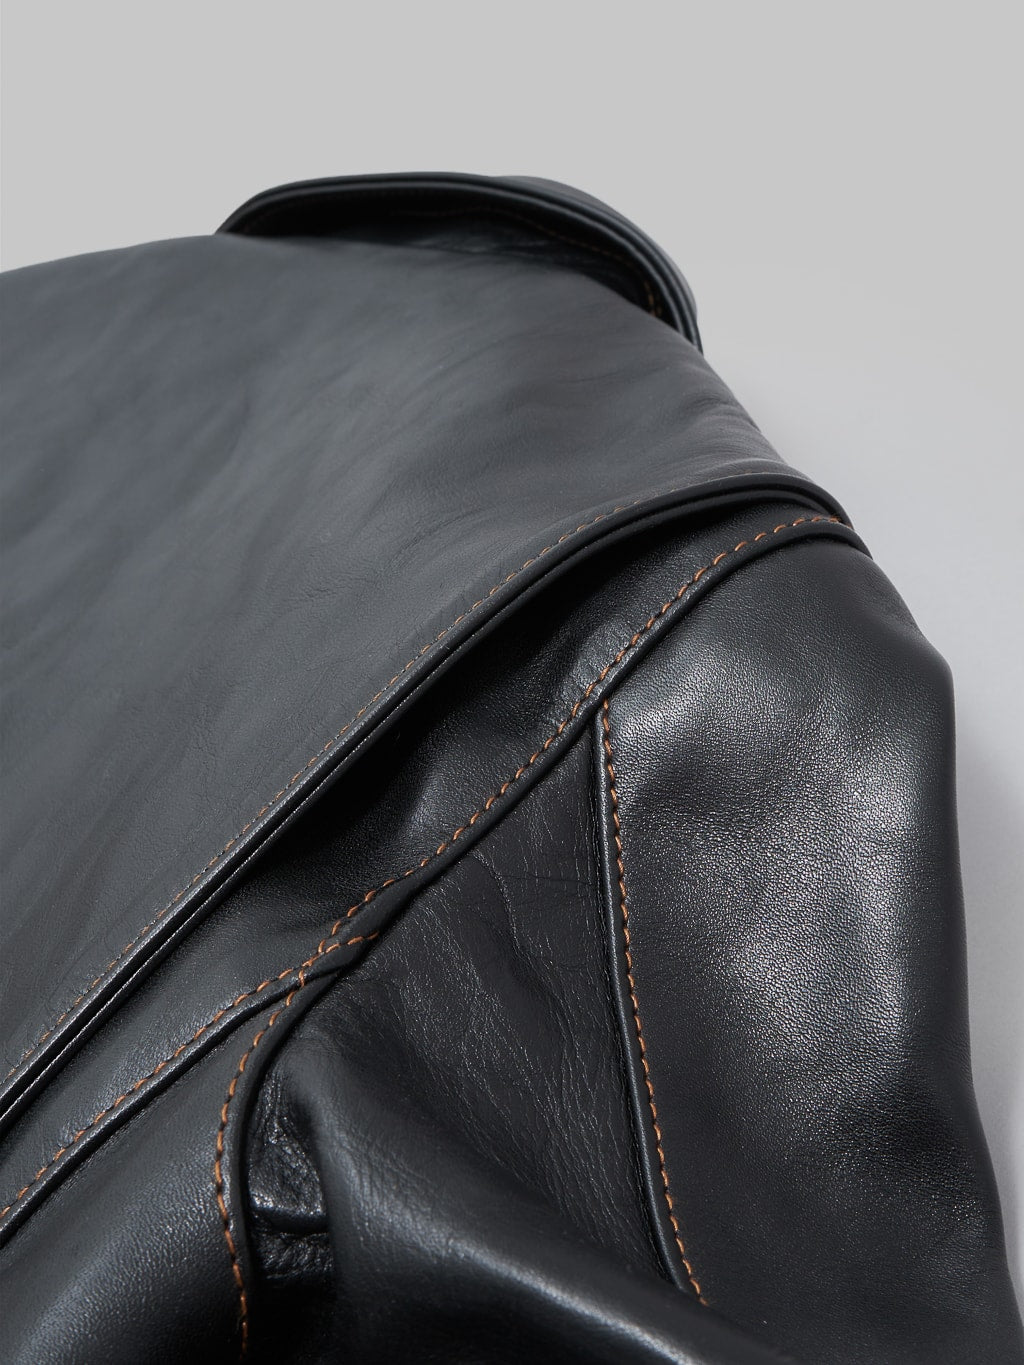 The Flat Head Horsehide leather double Riders Jacket Black Semi Aniline leather